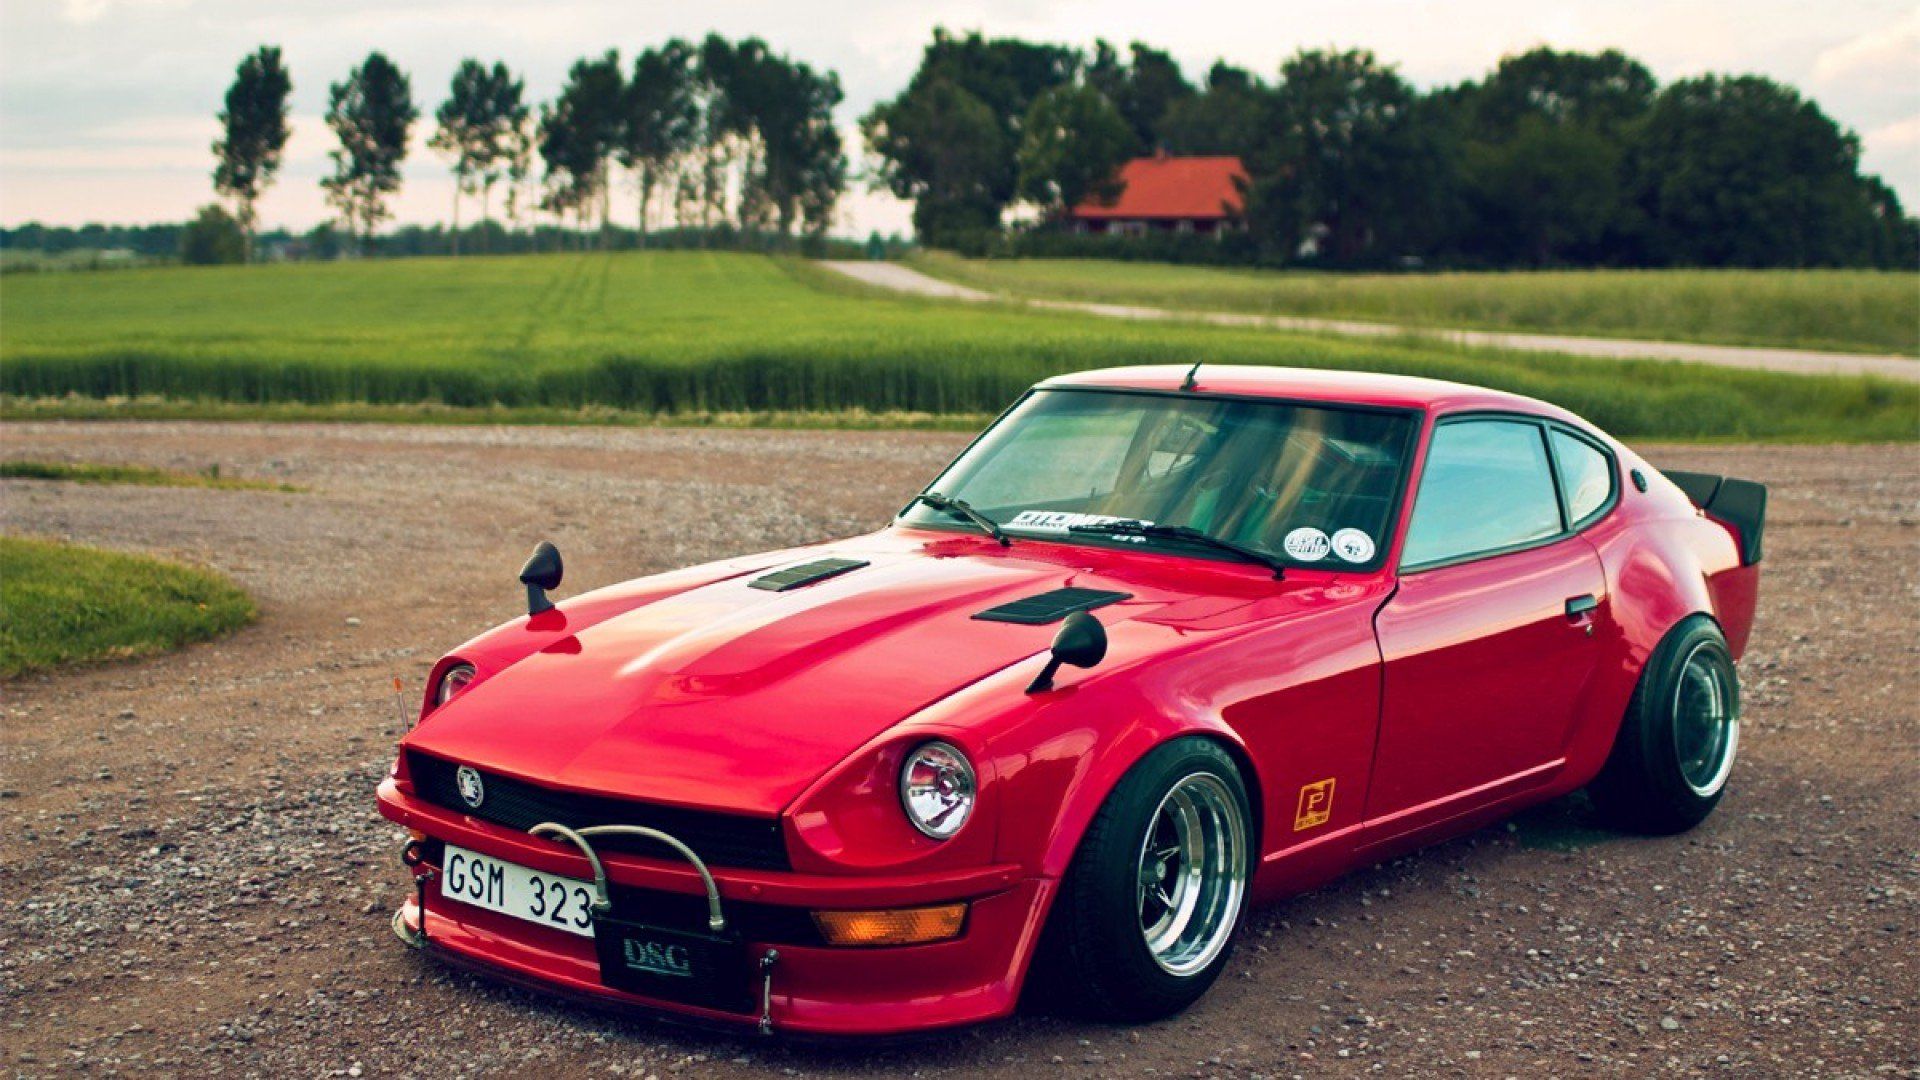 Nissan Fairlady Z Wallpapers Wallpaper Cave